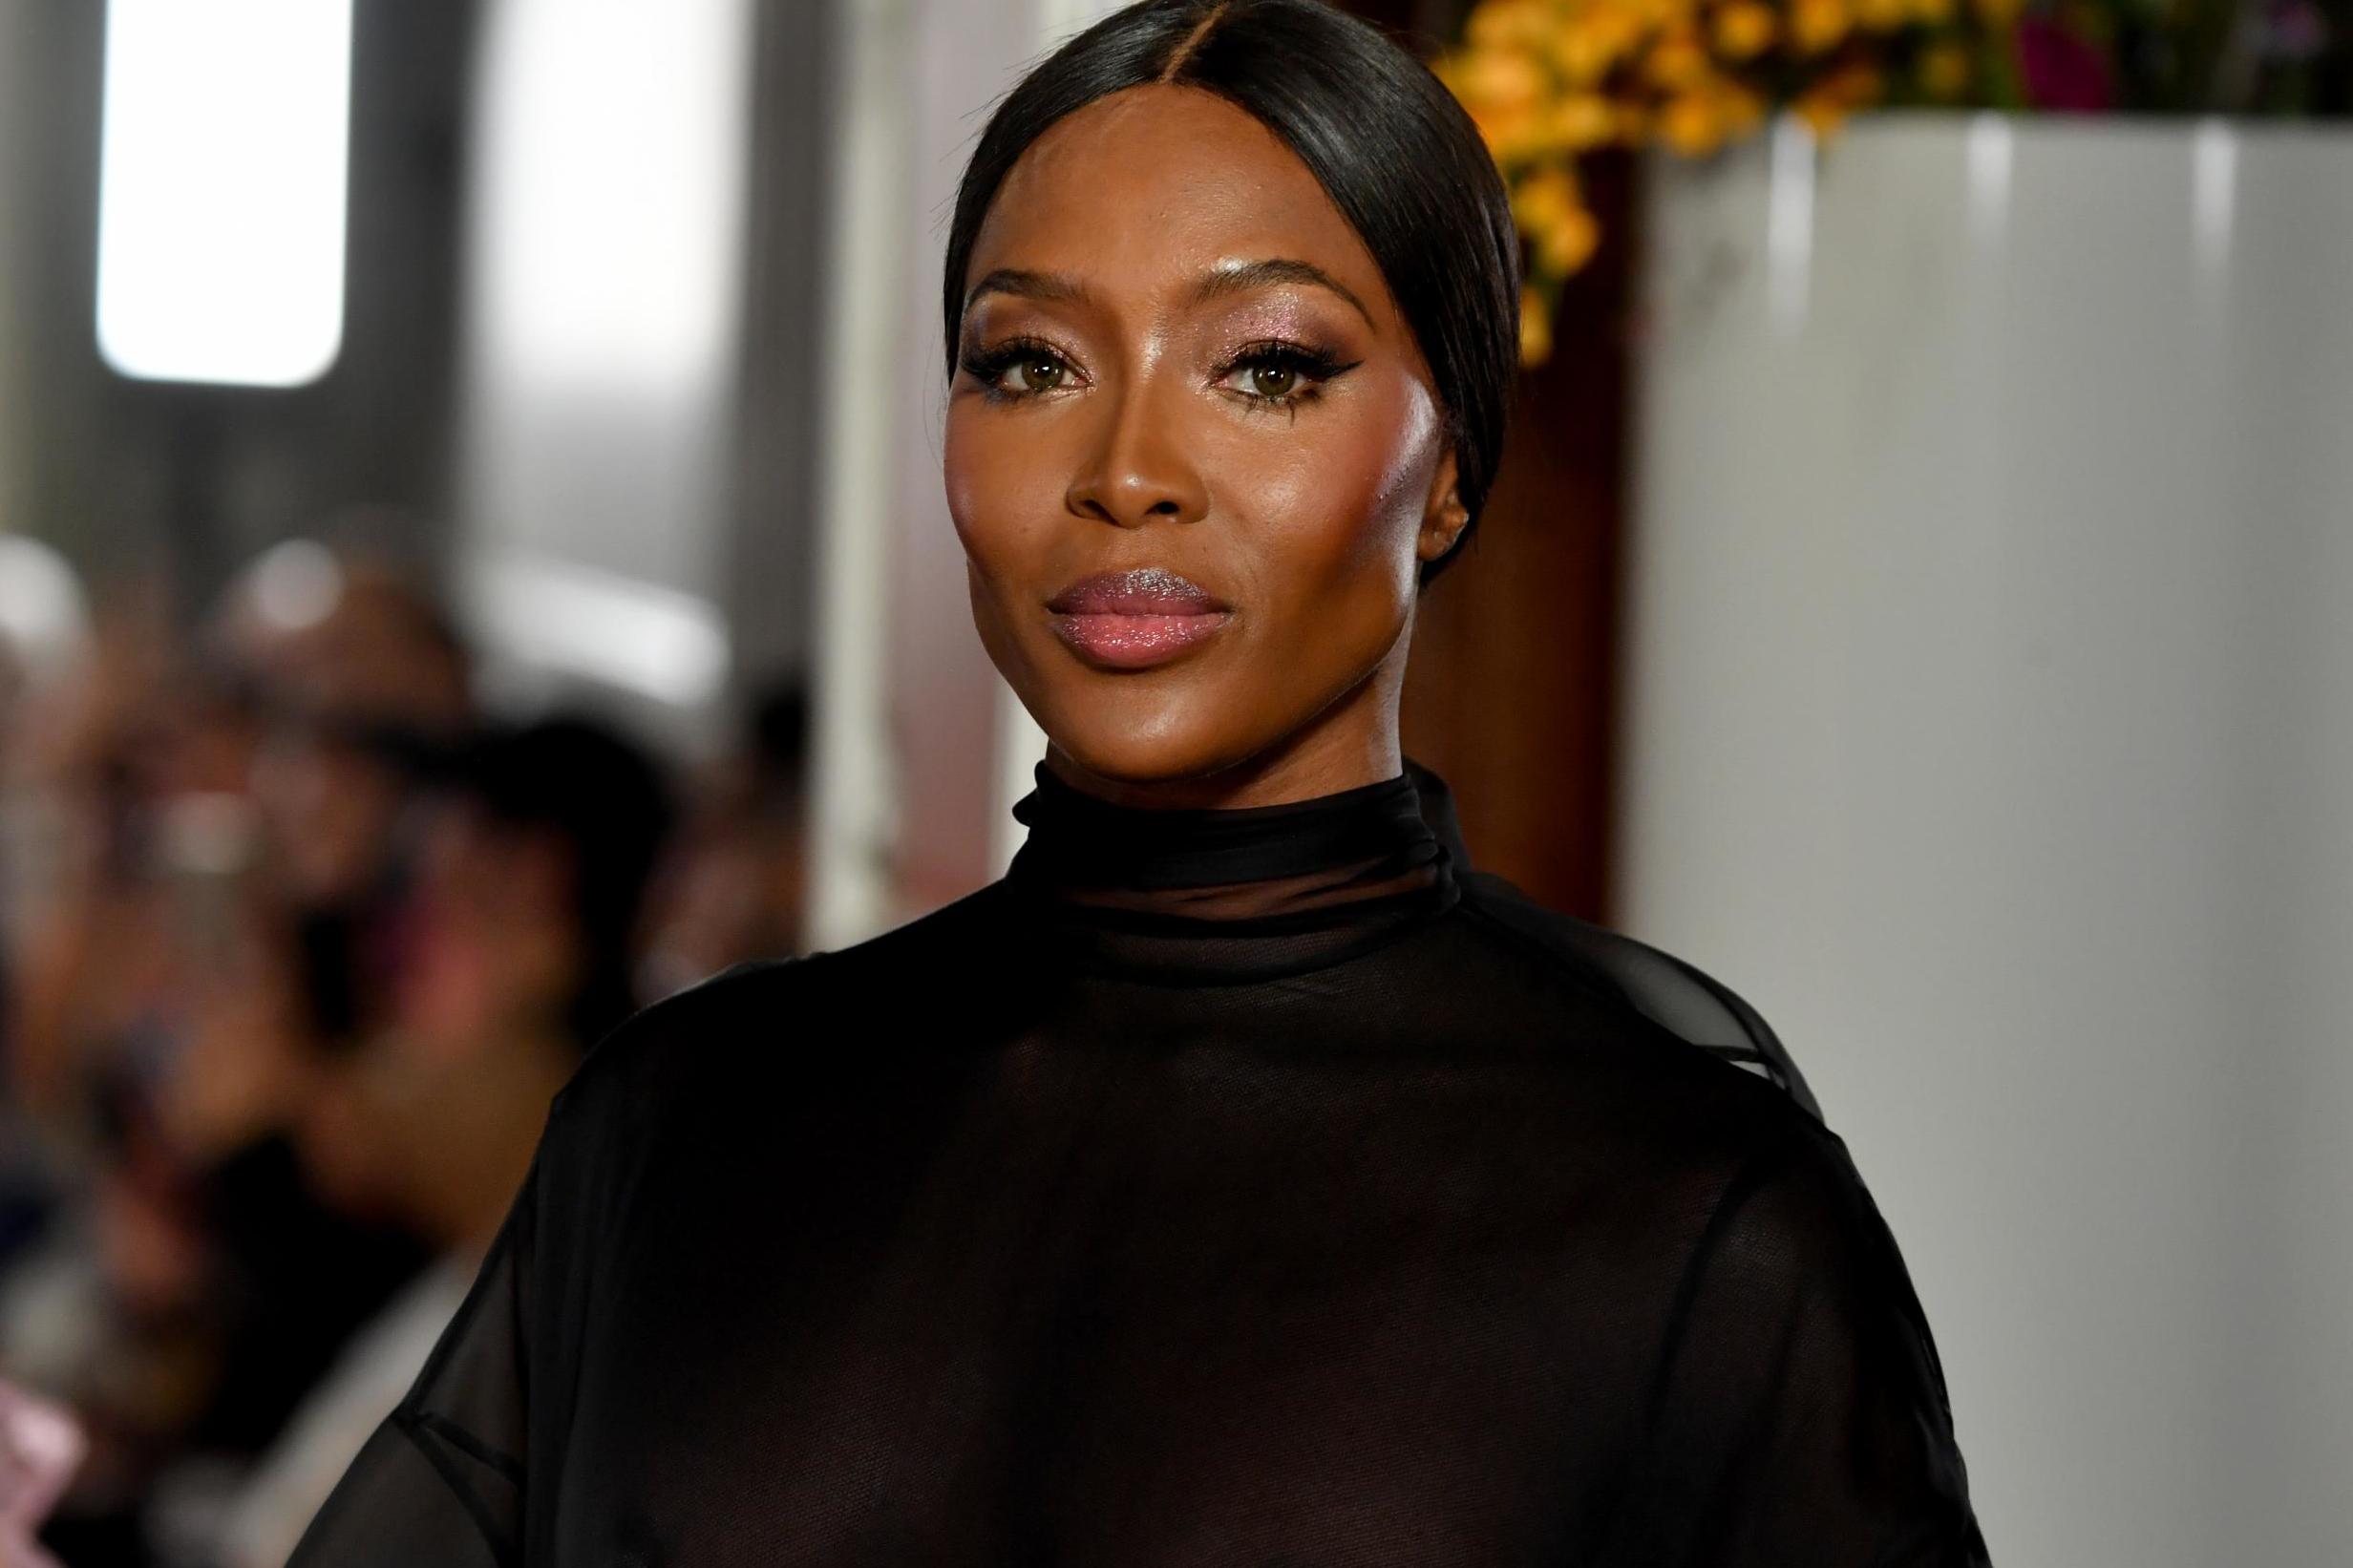 Naomi Campbell walked the Valentino Couture runway in Paris